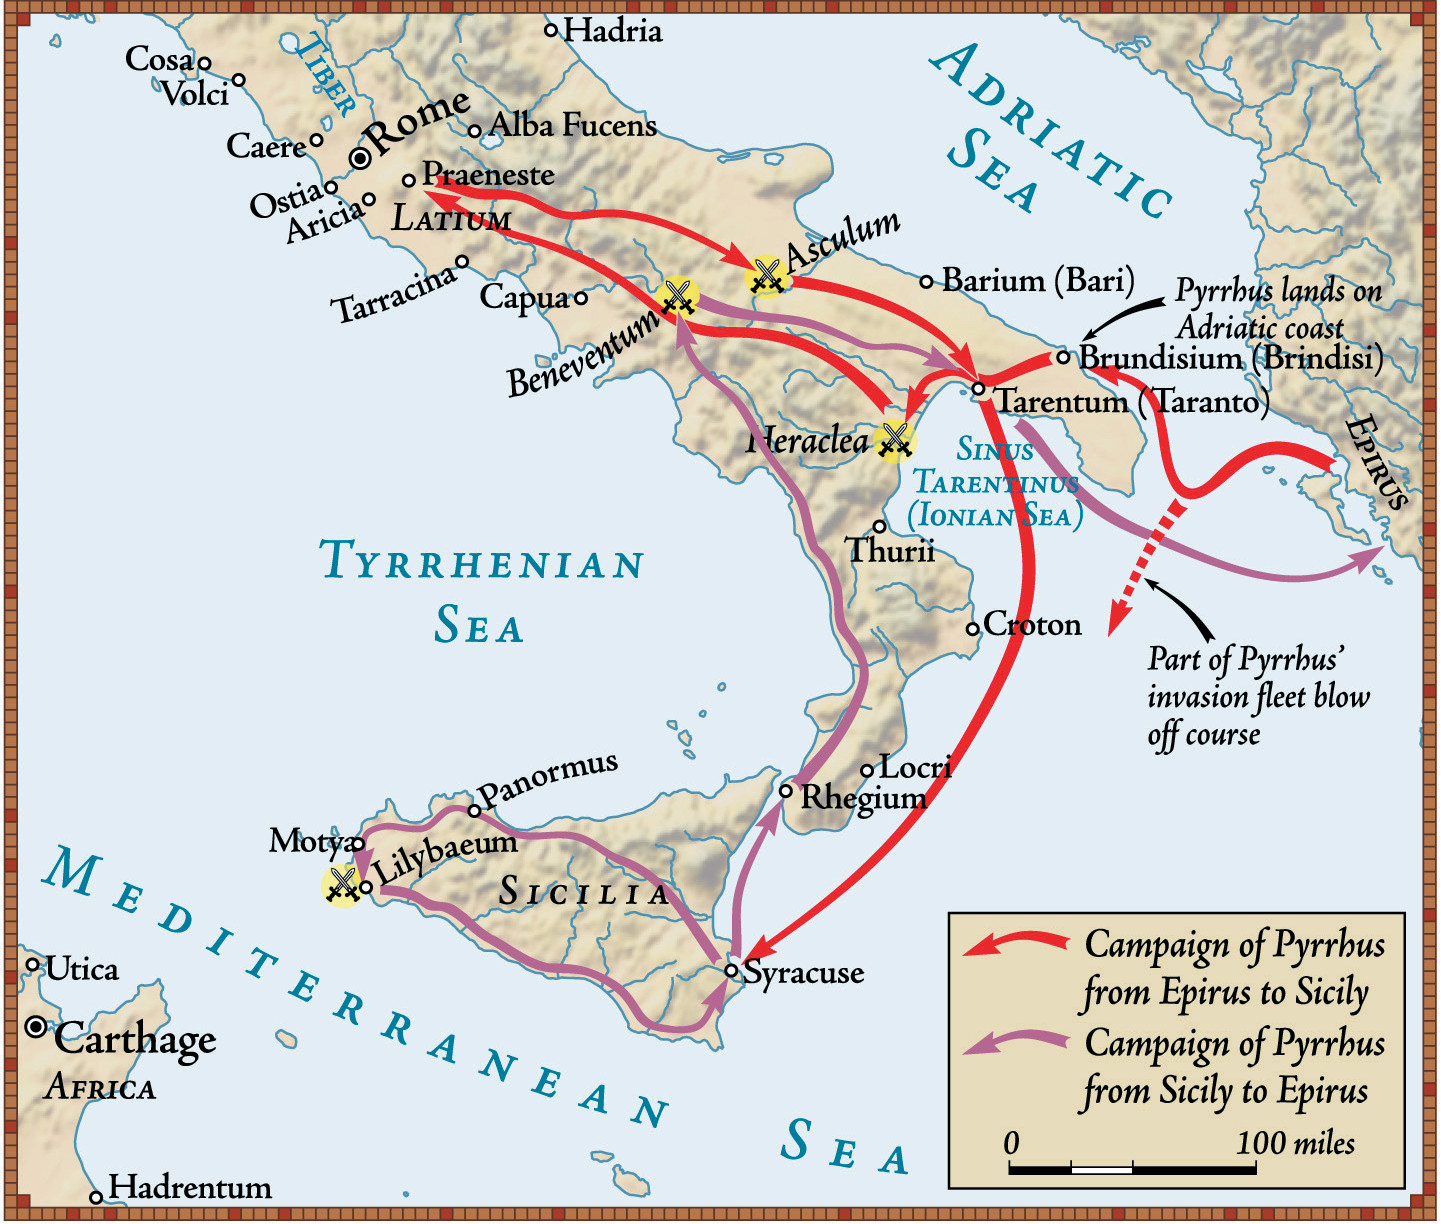 The steady growth of the Roman empire caused Italians in the southern part of the country to call on Greek mercenary leader Pyrrhus to check the Roman advance.